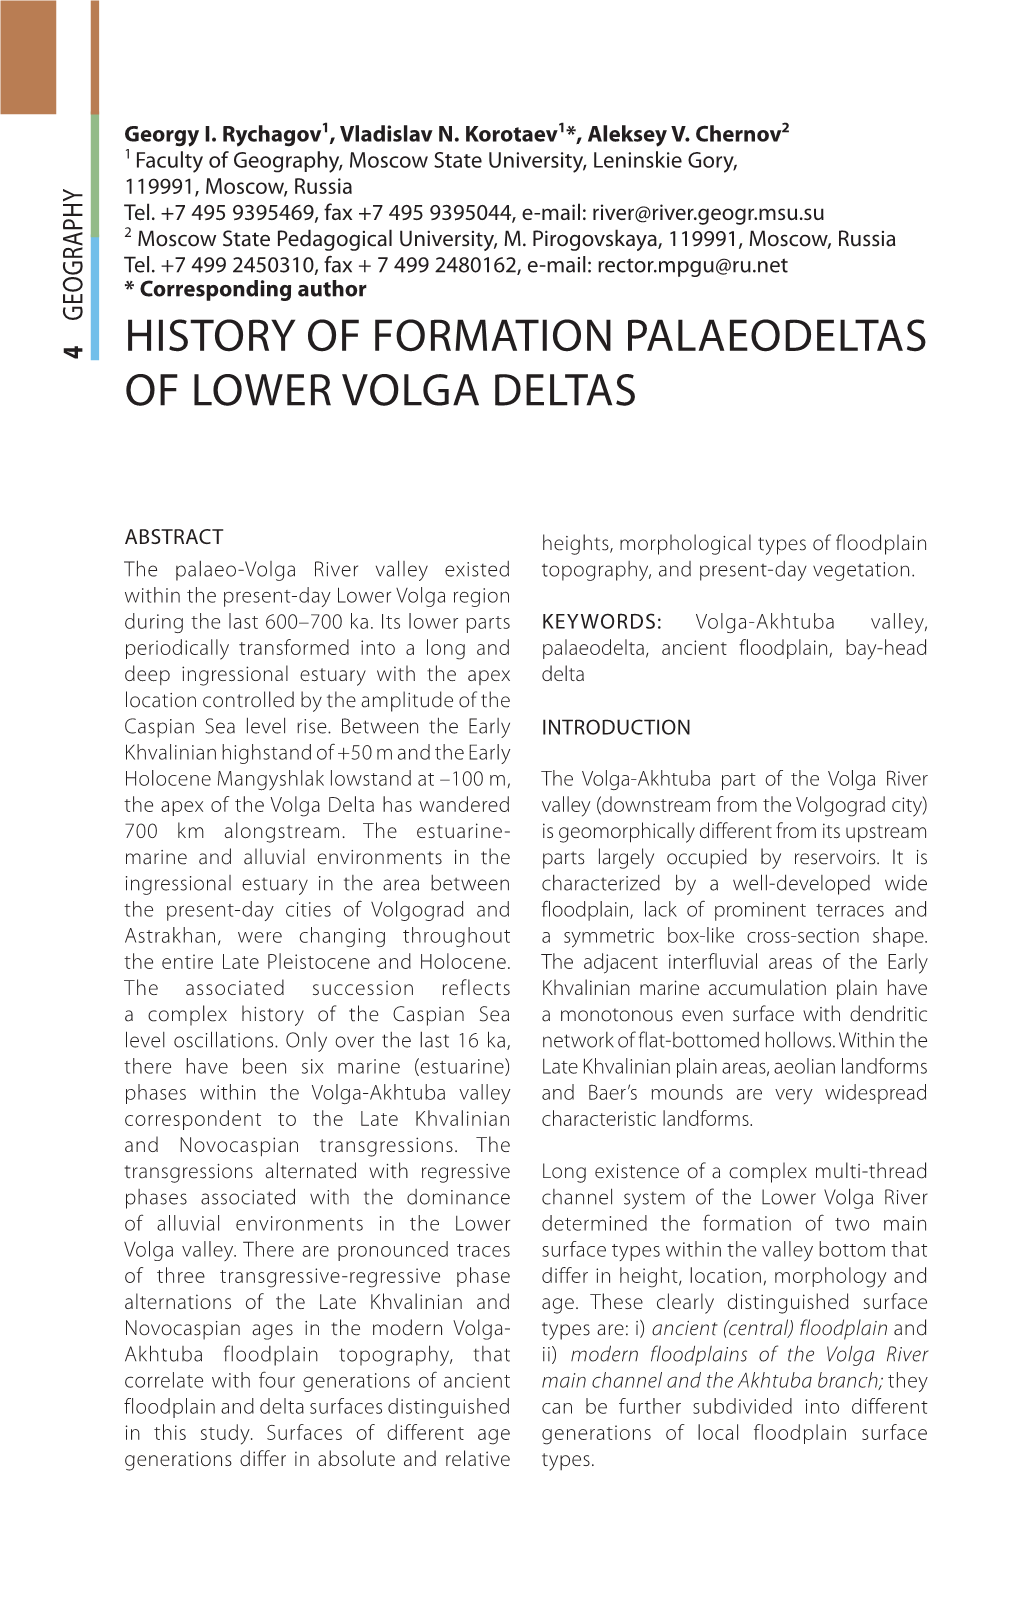 History of Formation Palaeodeltas of Lower